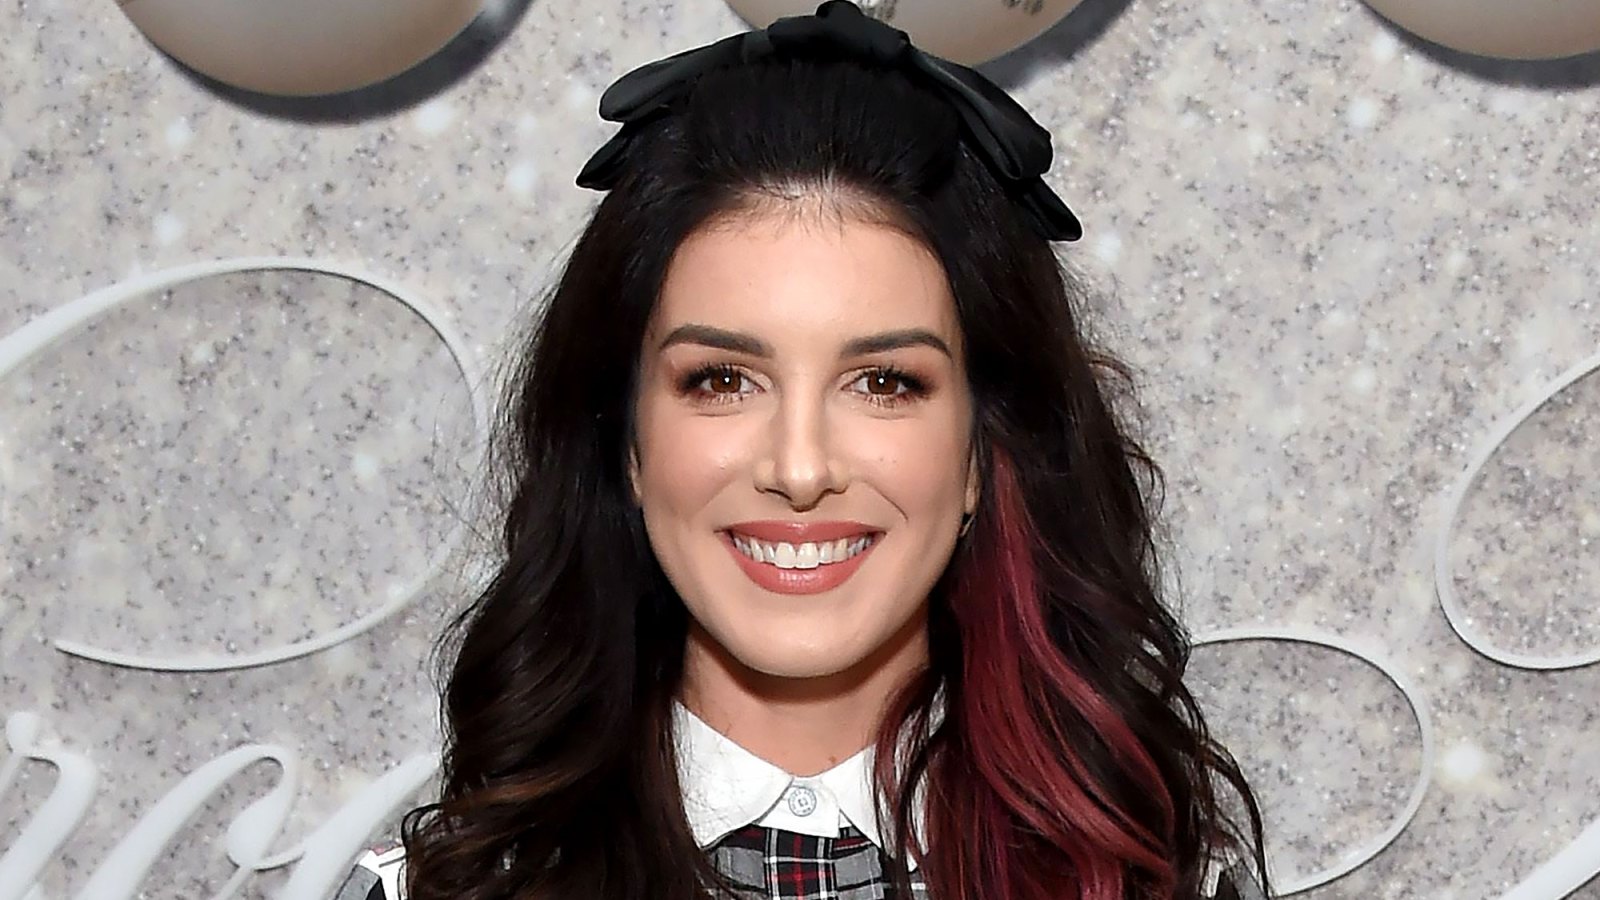 90210’s Shenae Grimes-Beech Gets Real About Her Postpartum Body